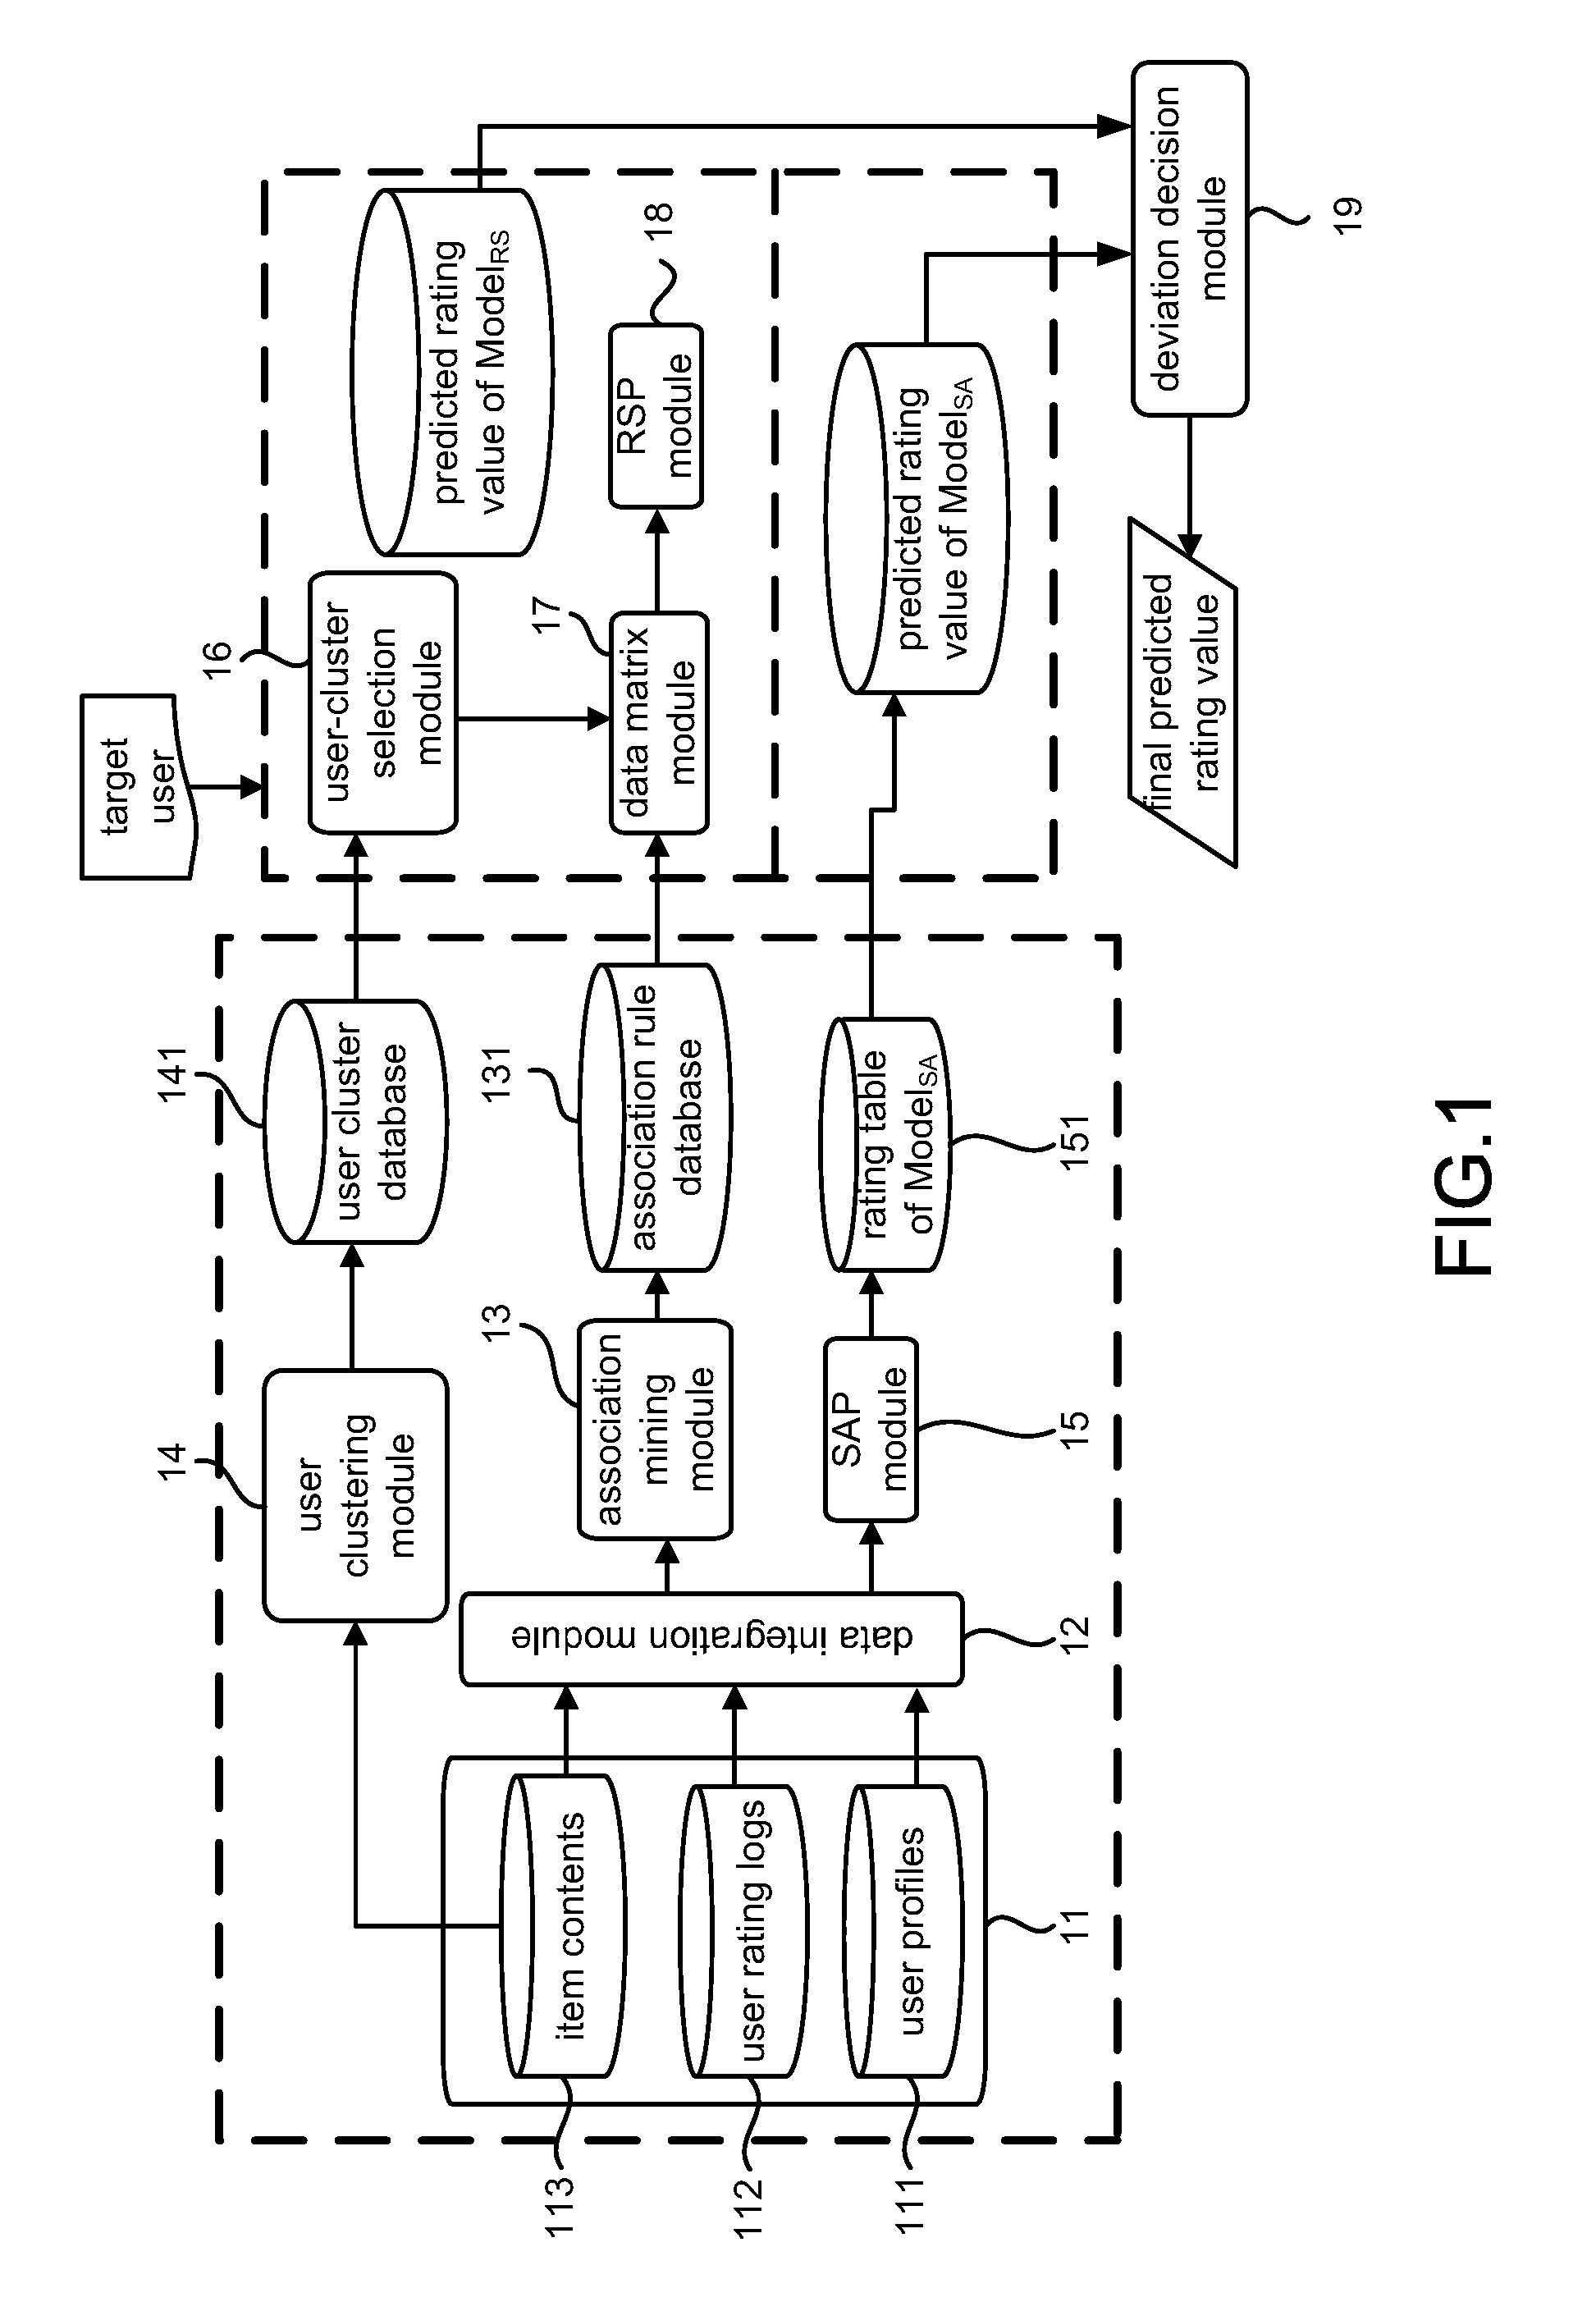 Recommendation System Using Rough-Set and Multiple Features Mining Integrally and Method Thereof